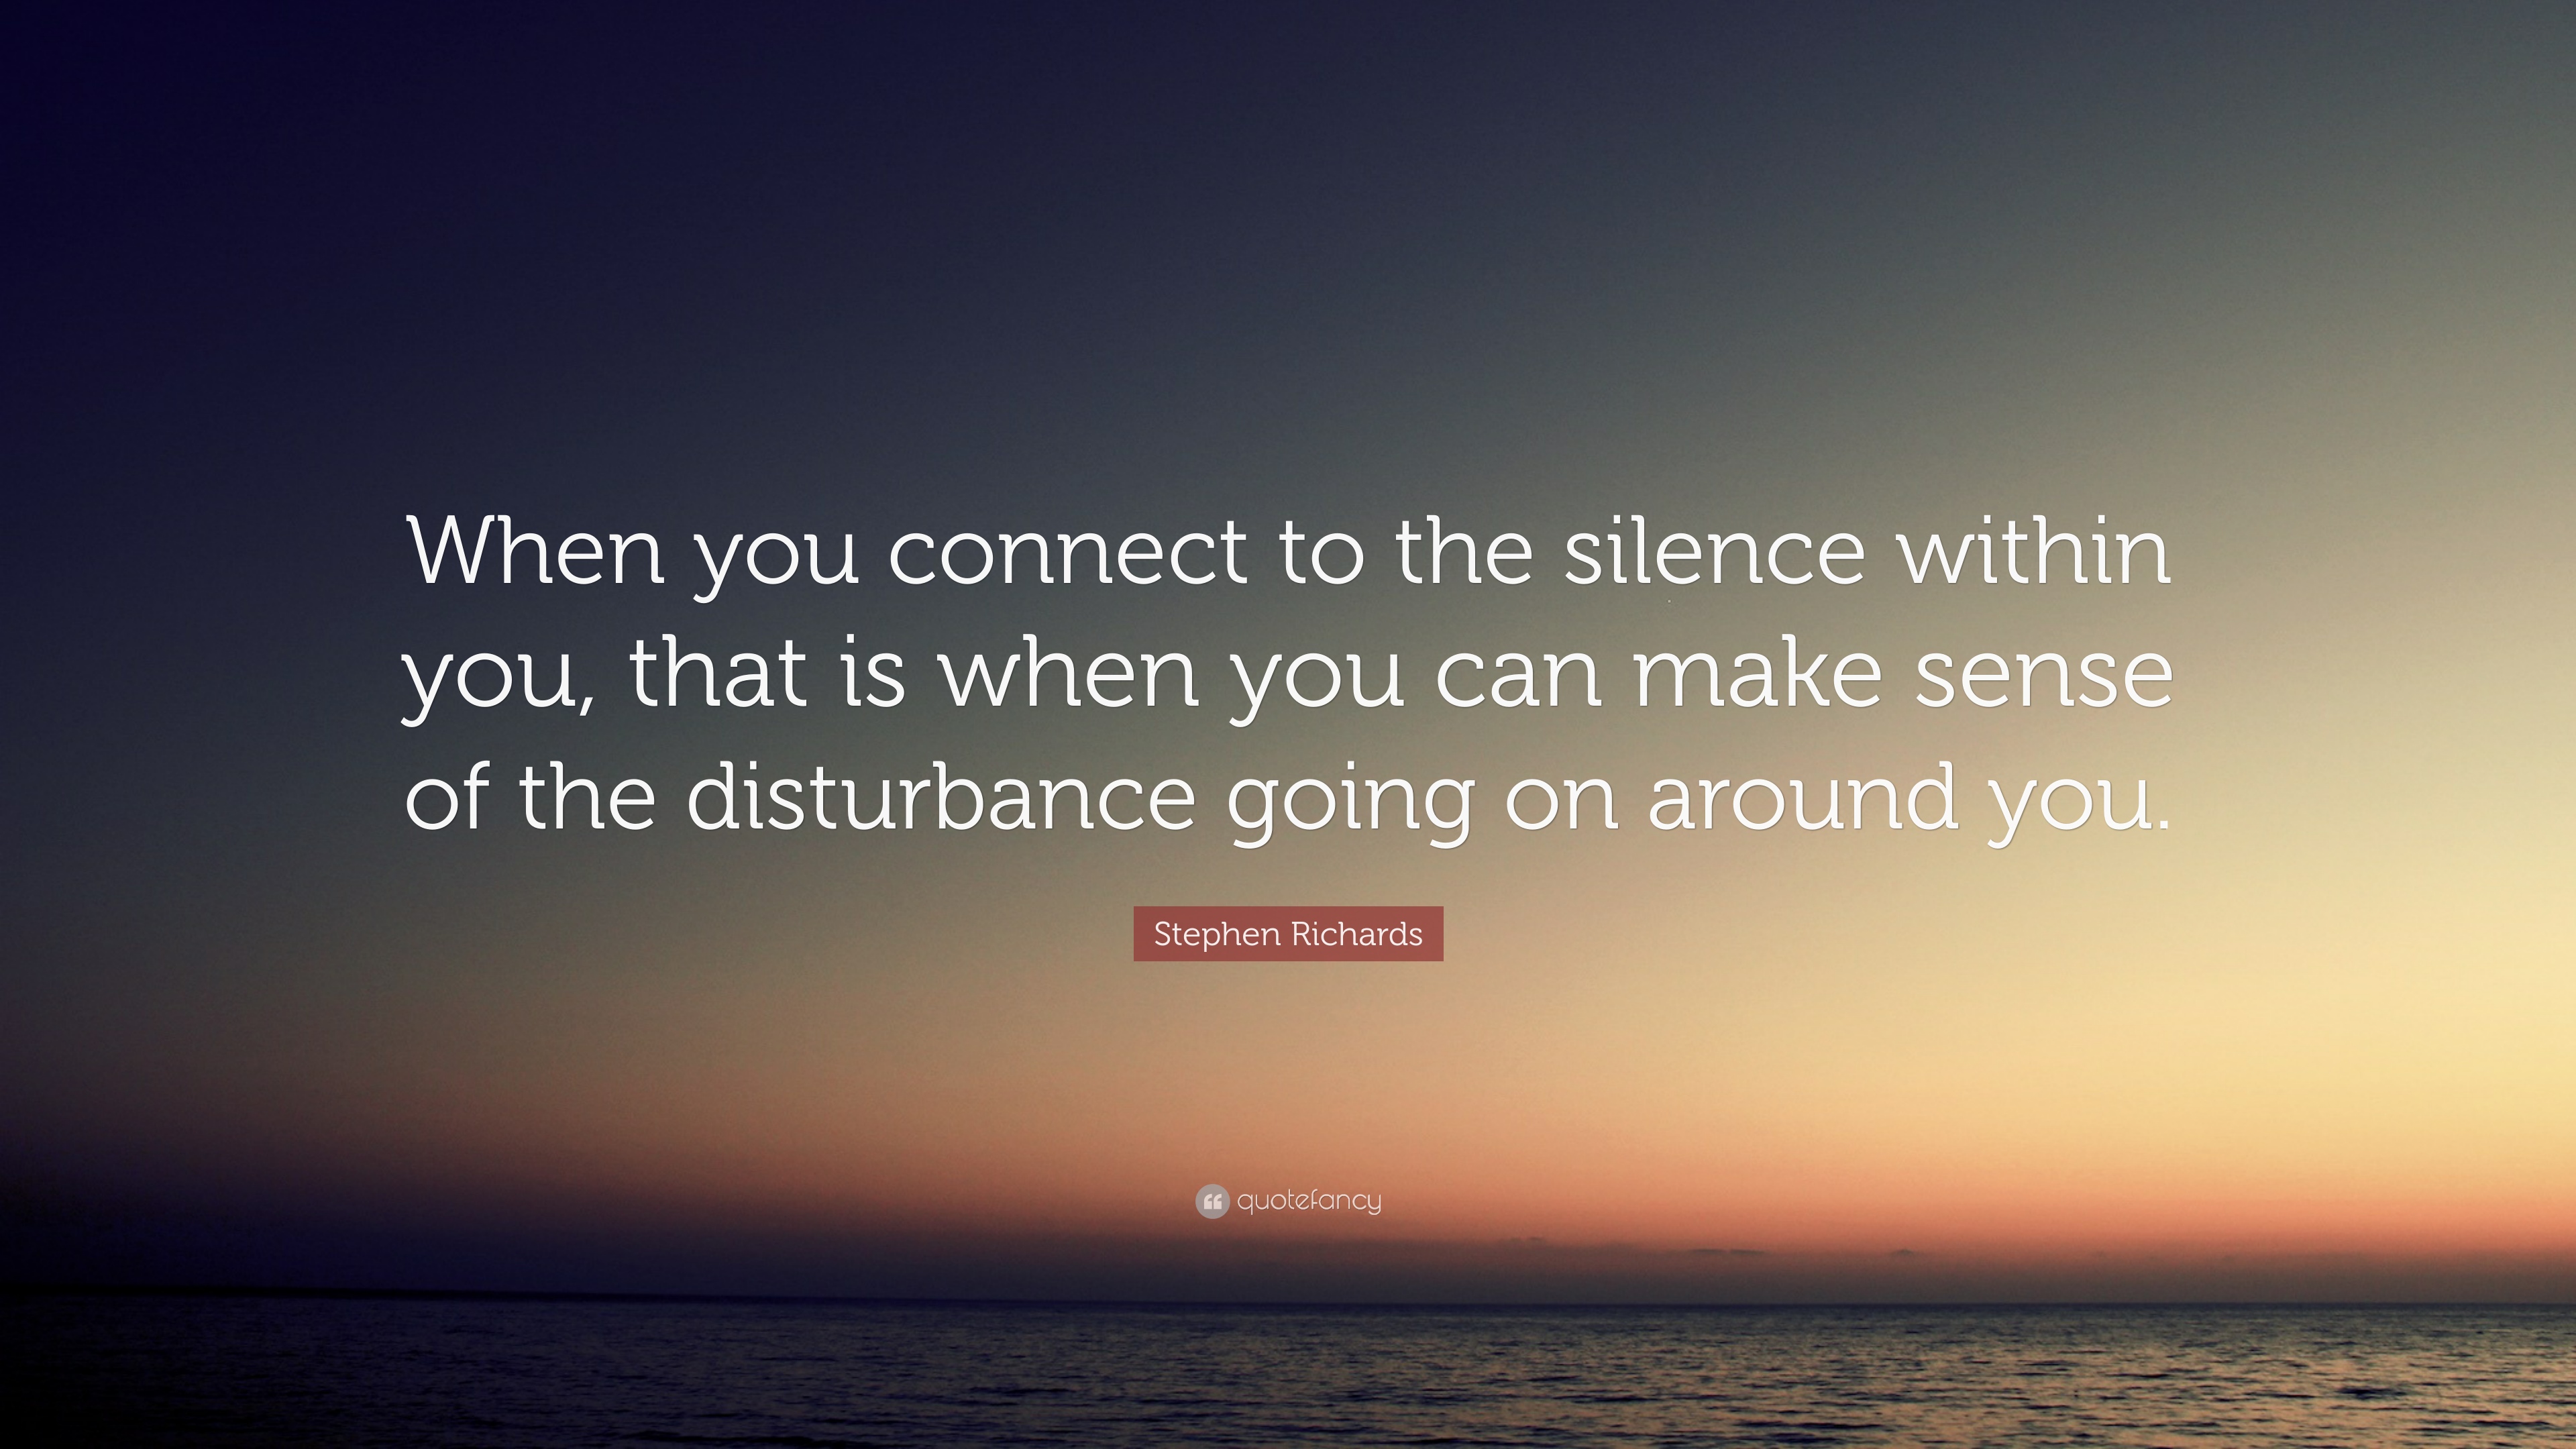 Stephen-Richards-Quote-When-you-connect-to-the-silence-within-you.jpg